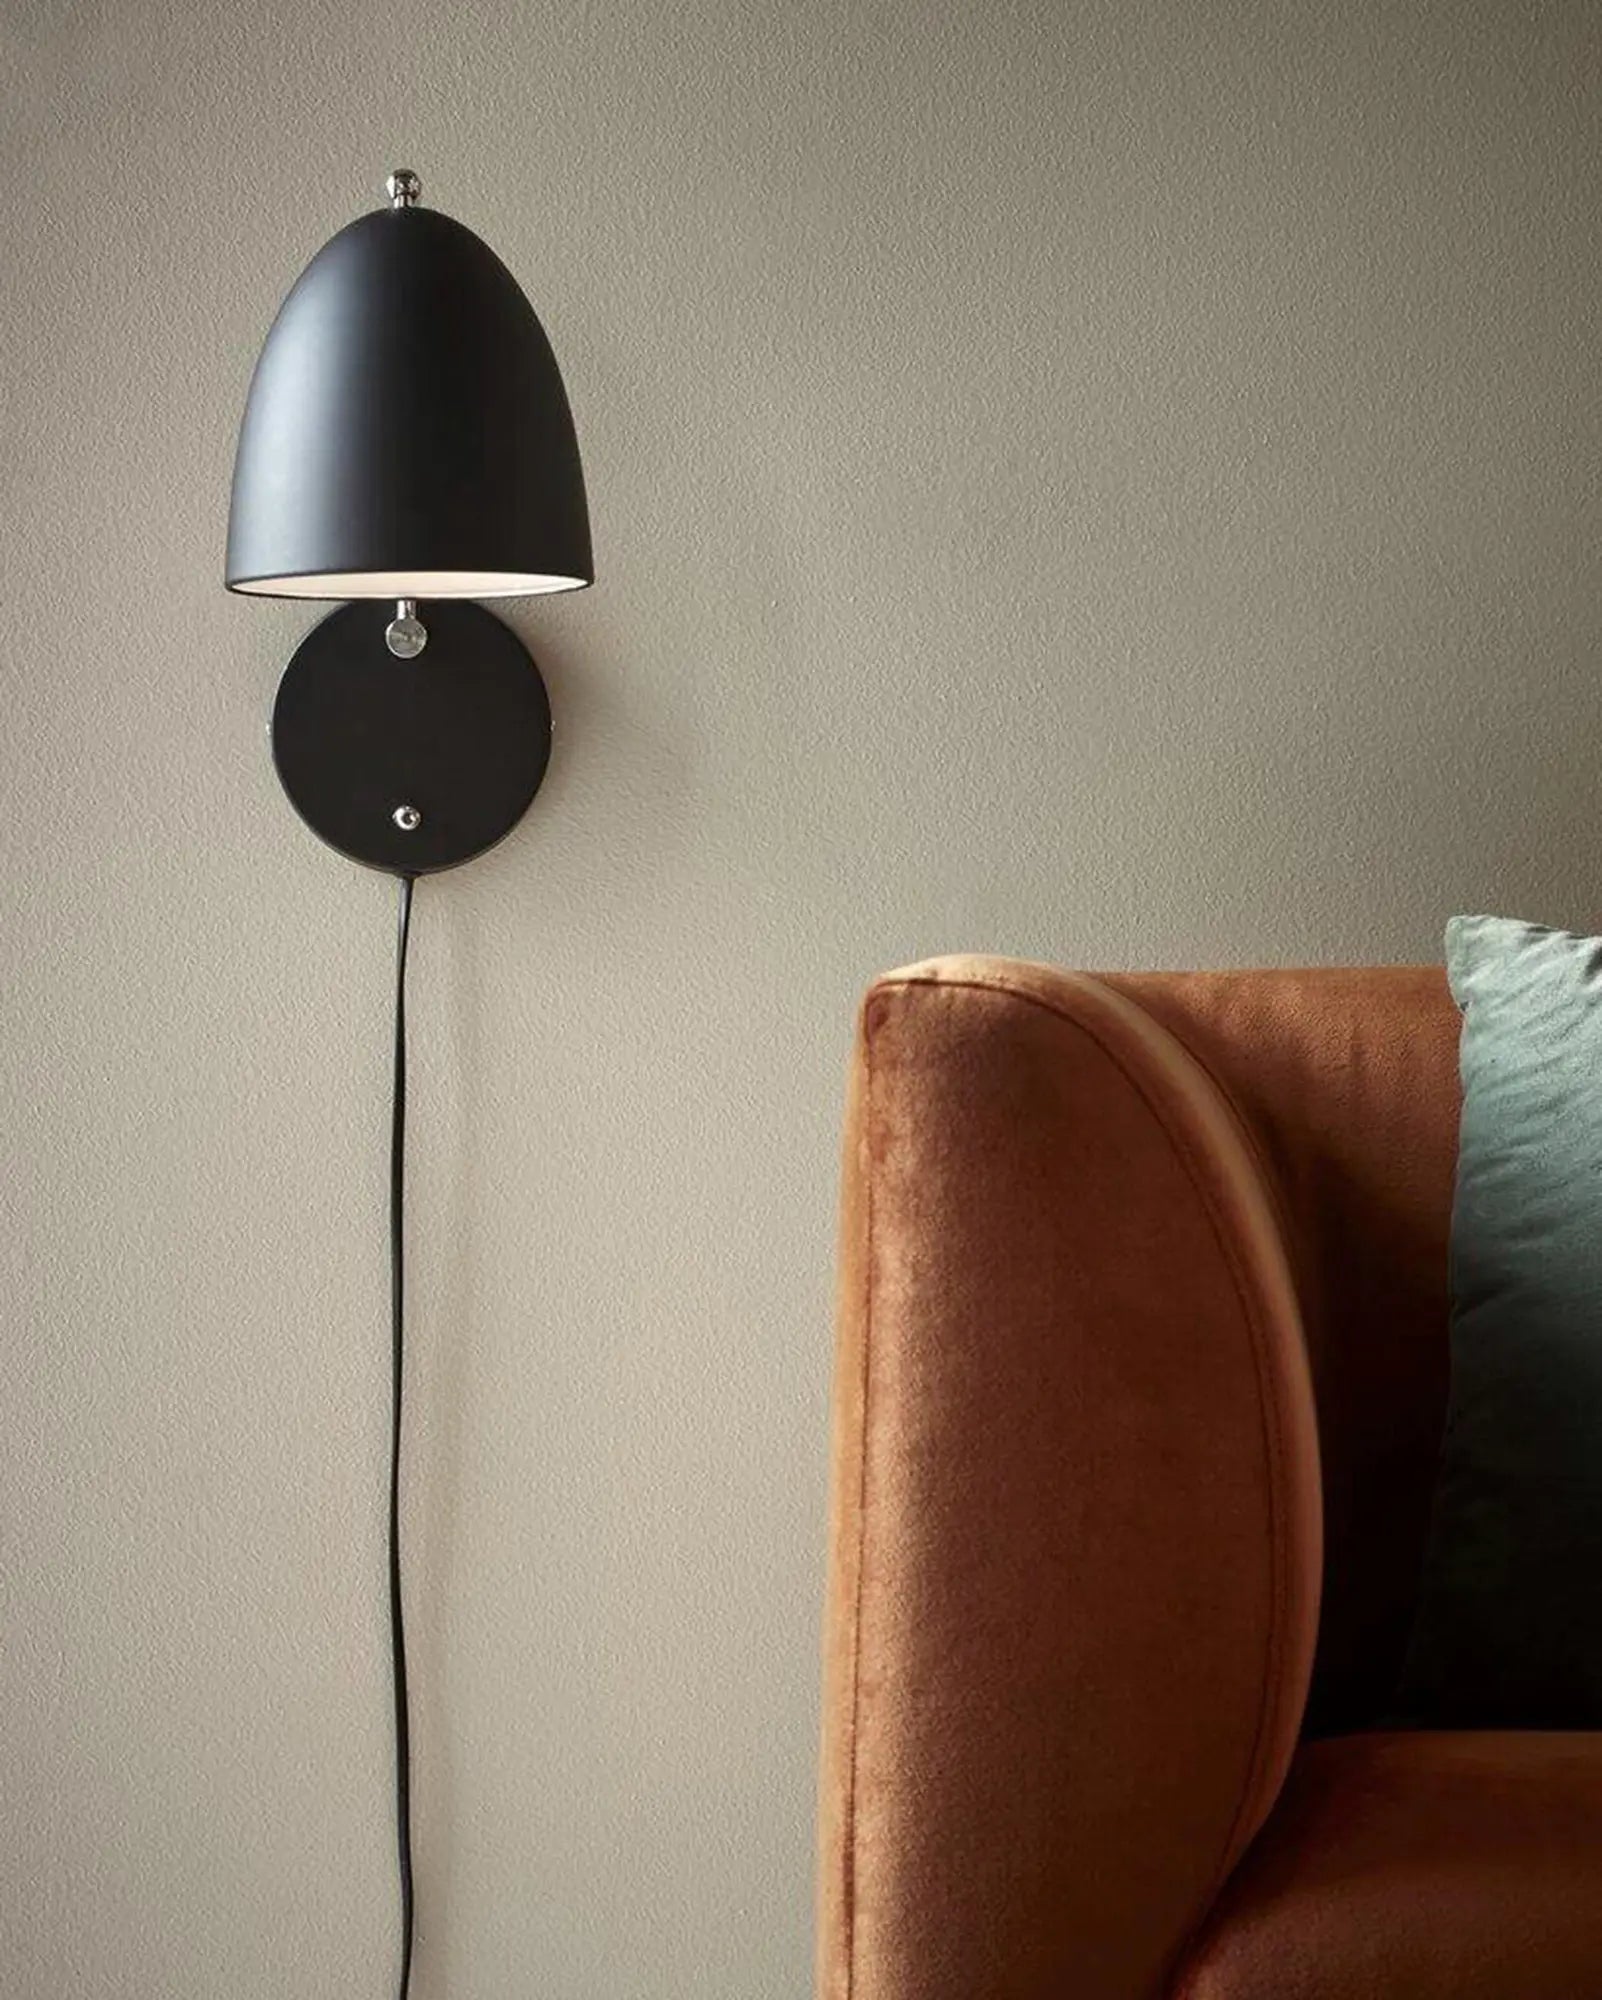 Alexander Wall Light Scandinavian minimalistic dome in black on the side of a sofa bed